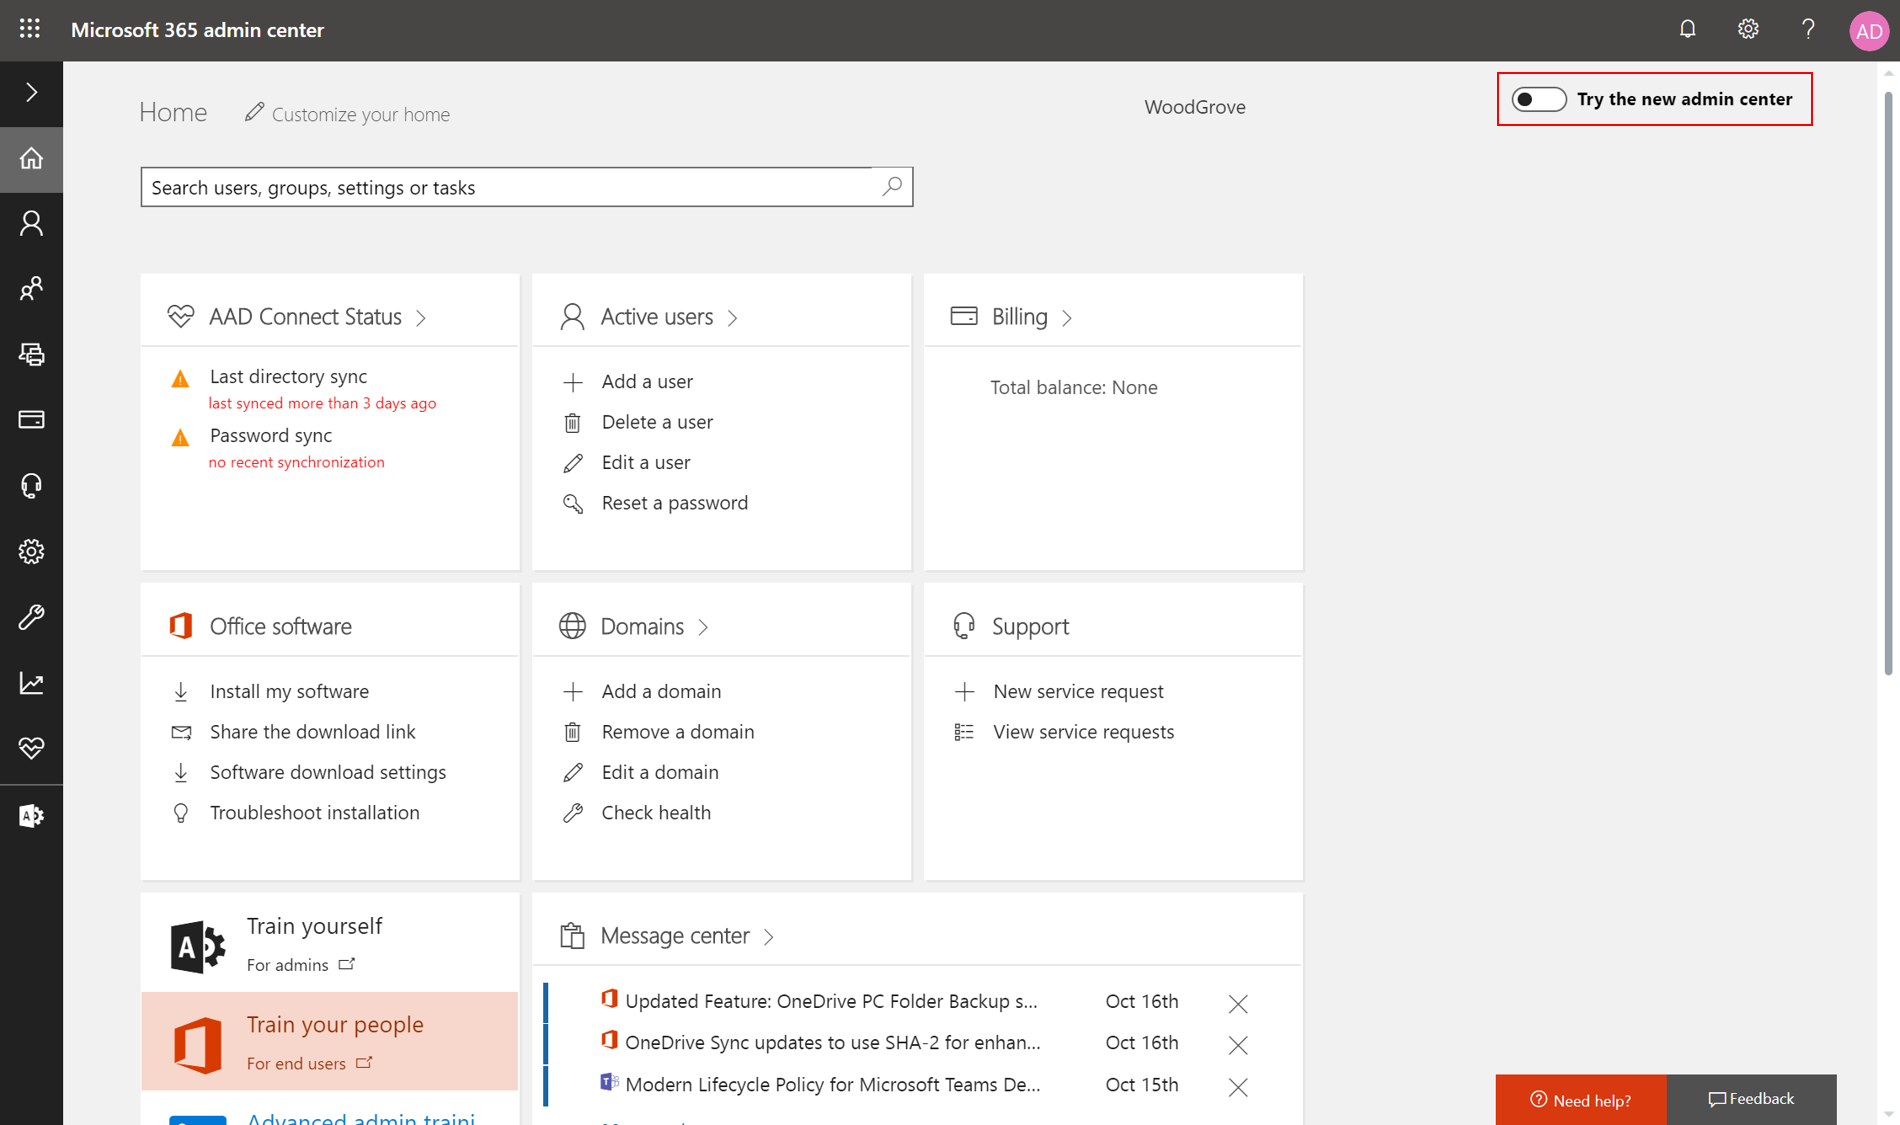 Preview the new M365 admin center experience